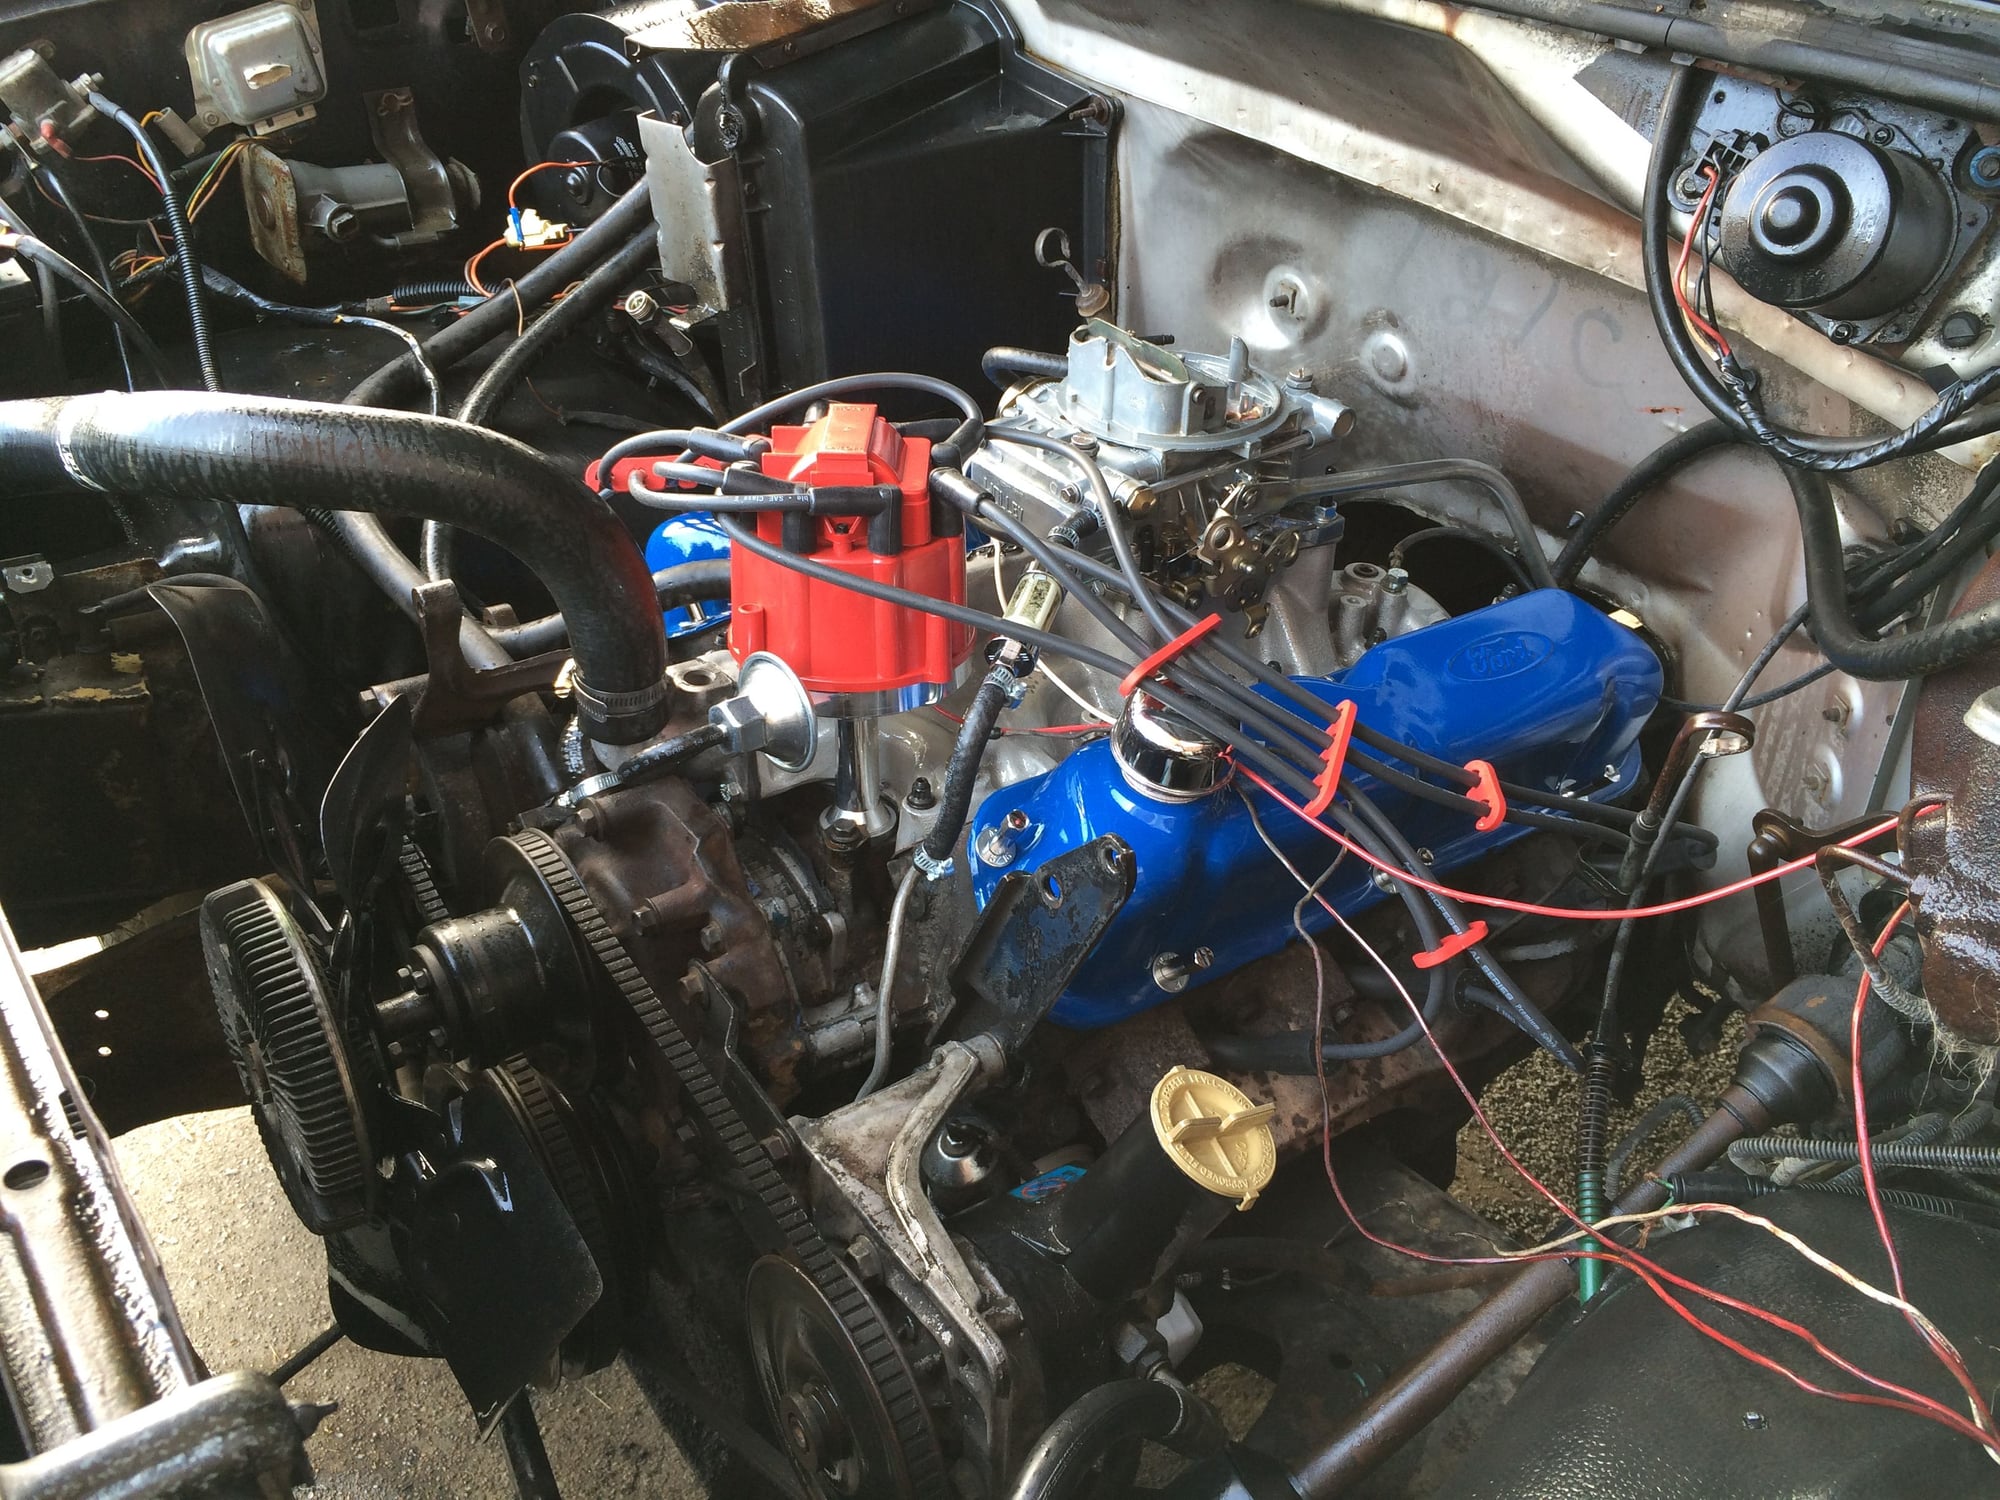 Saving a 1982 F100 from being junked - Semi-Restore - pic heavy - Page